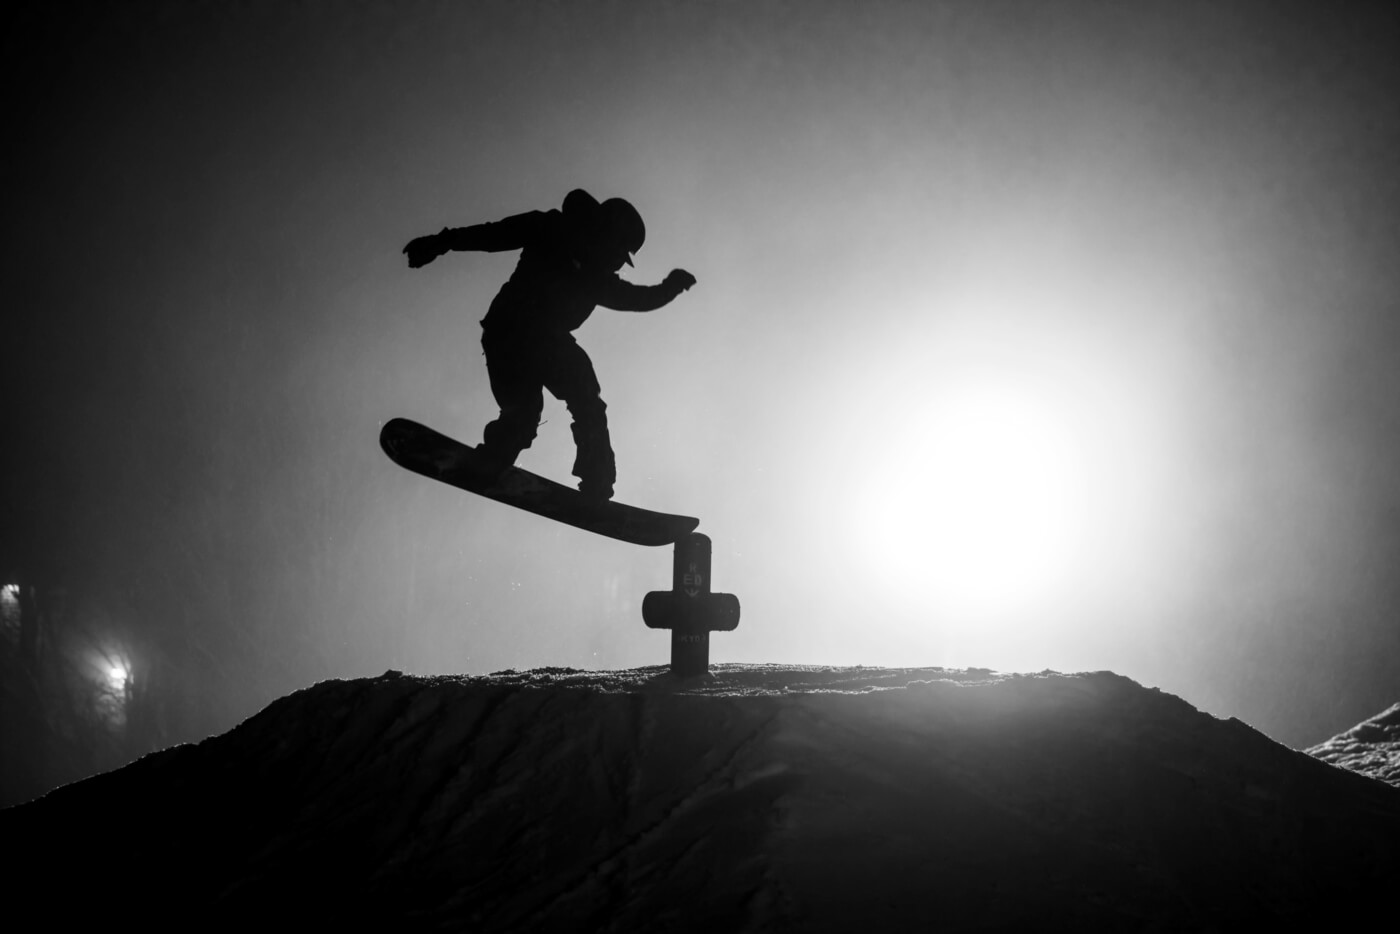 Black and white imaged of a snowboarder silhouetted mid-air.